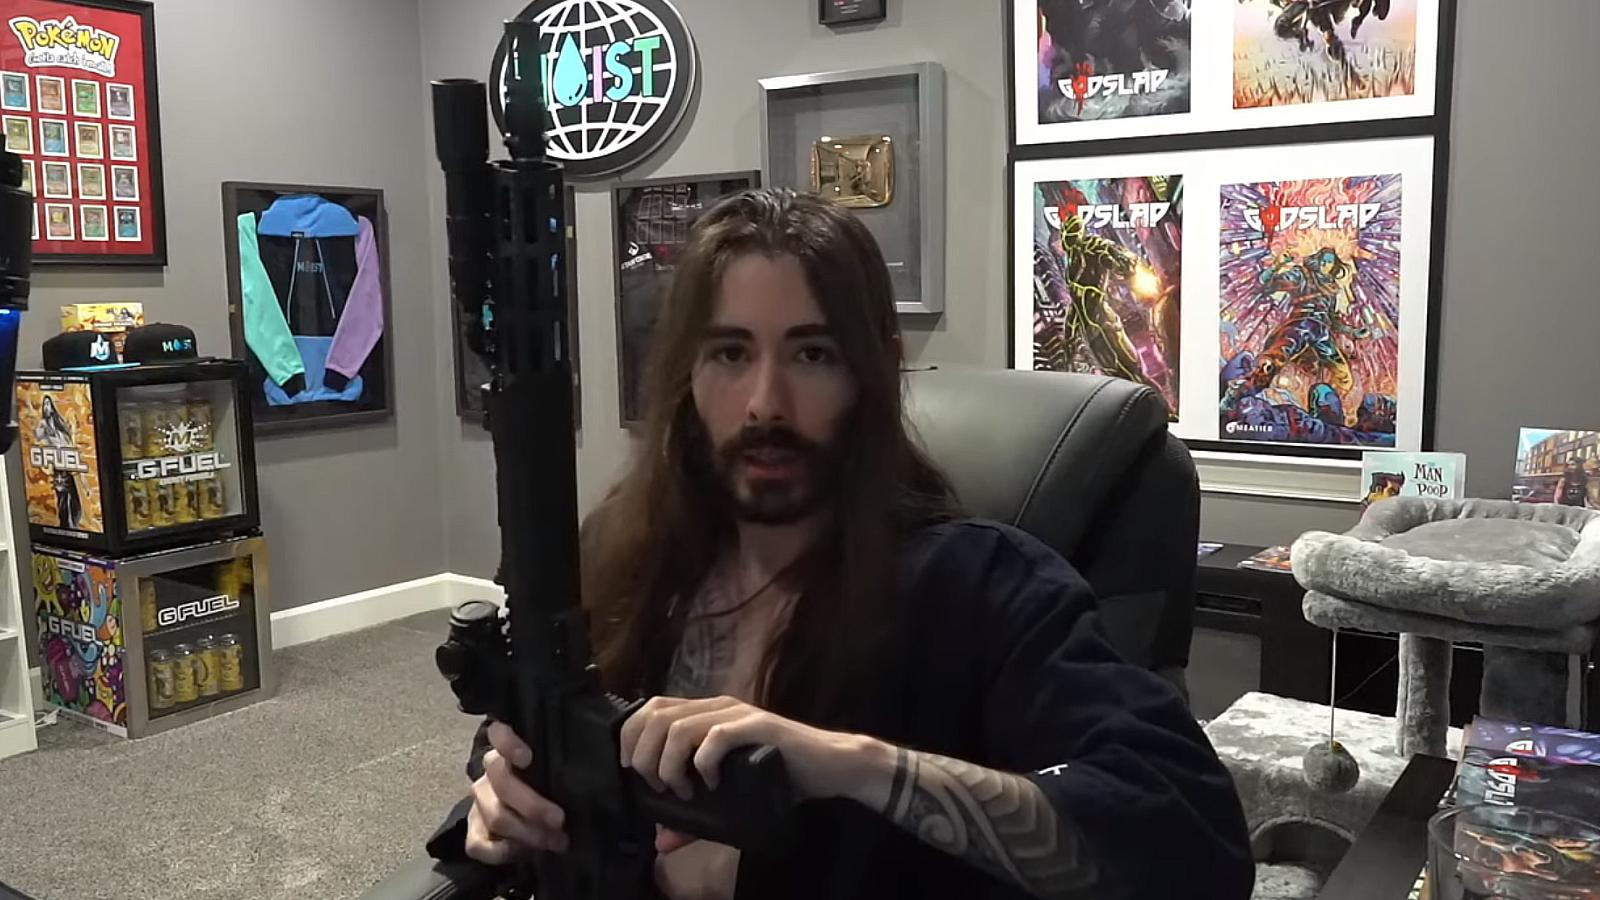 MoistCr1TiKal with an assault rifle in his latest video